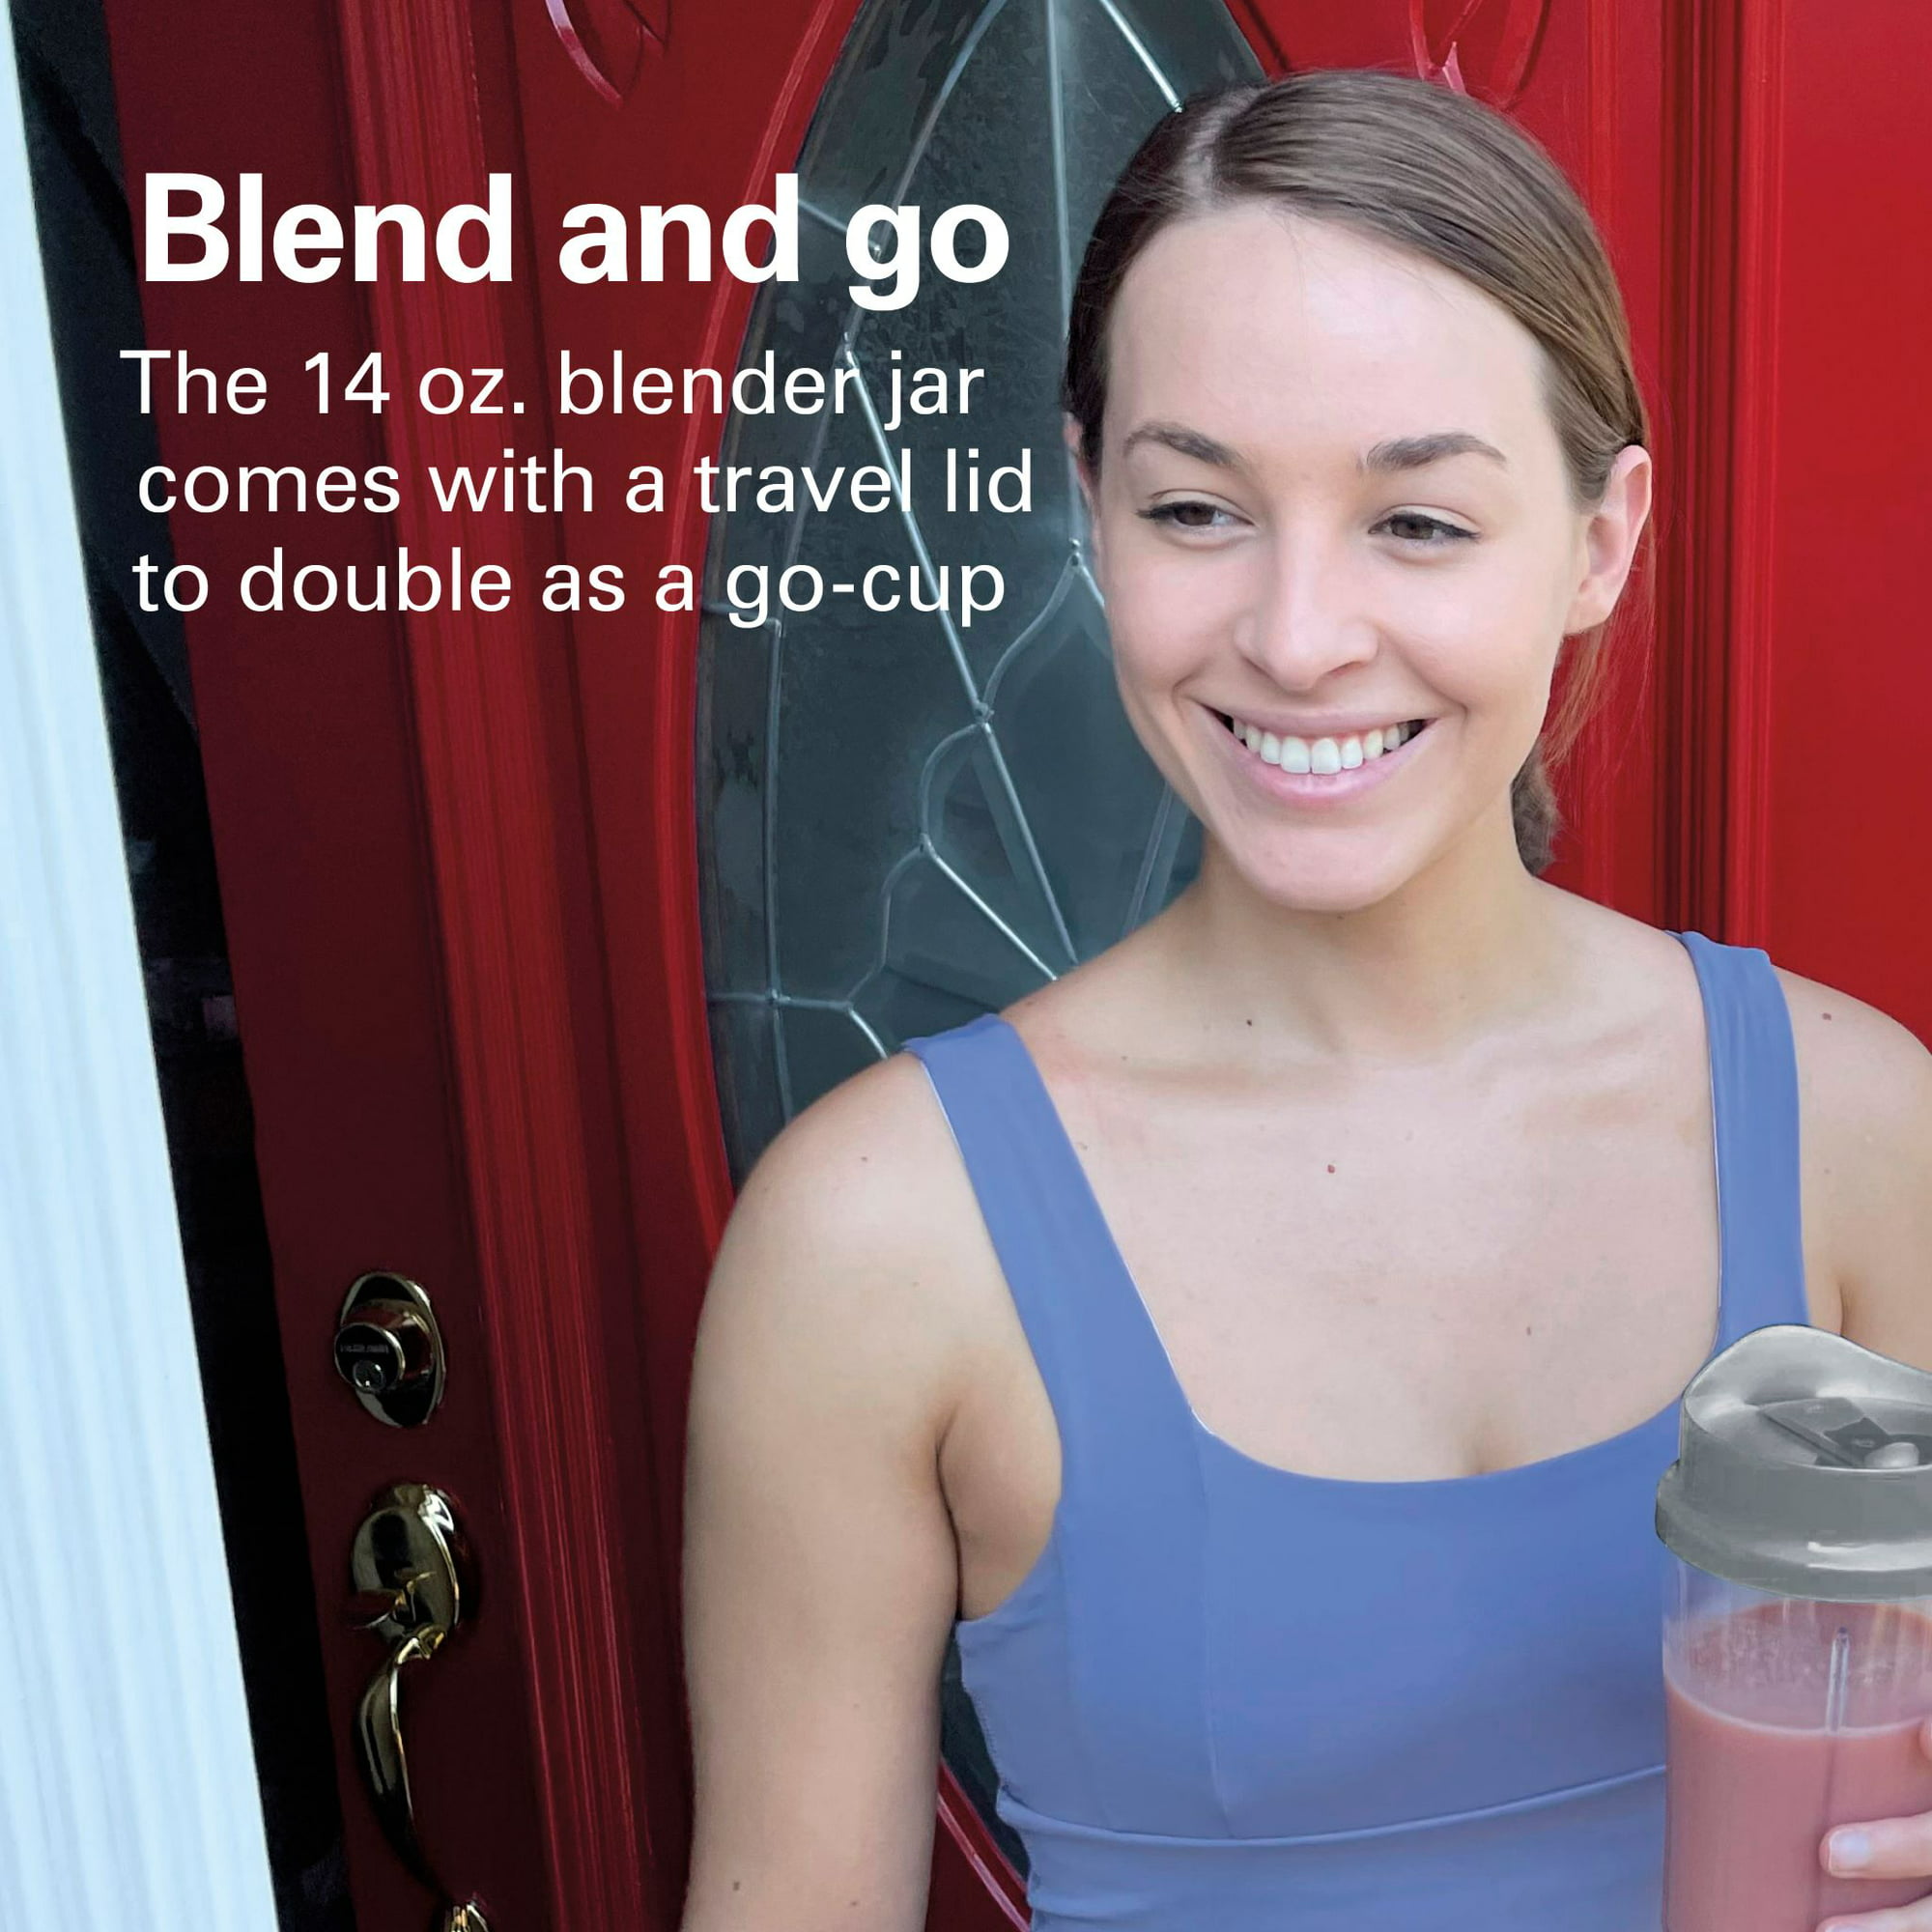 https://themarketdepot.com/wp-content/uploads/2023/01/Hamilton-Beach-Single-Serve-Personal-Smoothie-Blender-with-14-oz.-Travel-Cup-and-Lid-Gray-Model-51128-6.jpeg